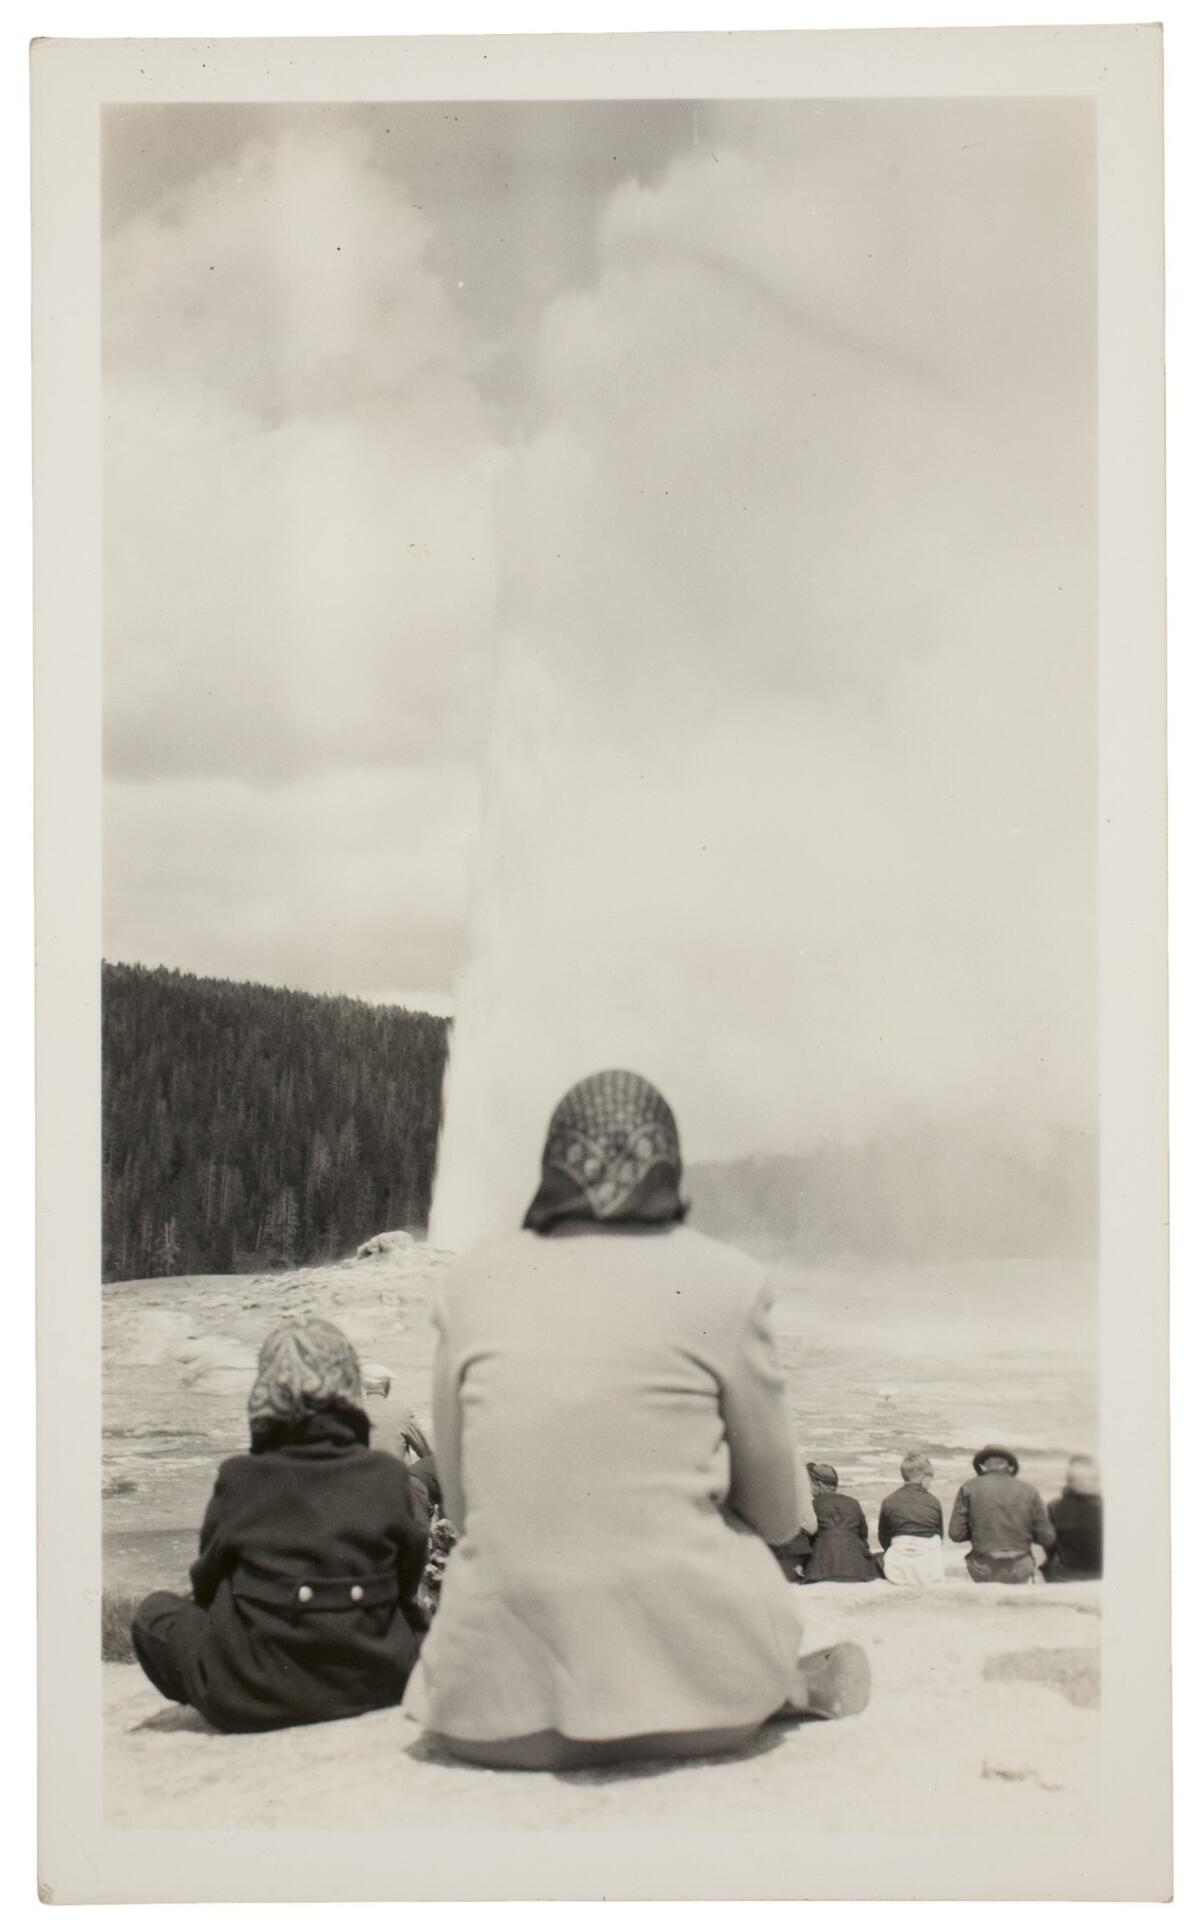 Photographer unkown, Old Faithful Geyser, Yellowstone National Park, June 1940 (Image courtesy of George Eastman Museum, Gift of Peter J. Cohen)